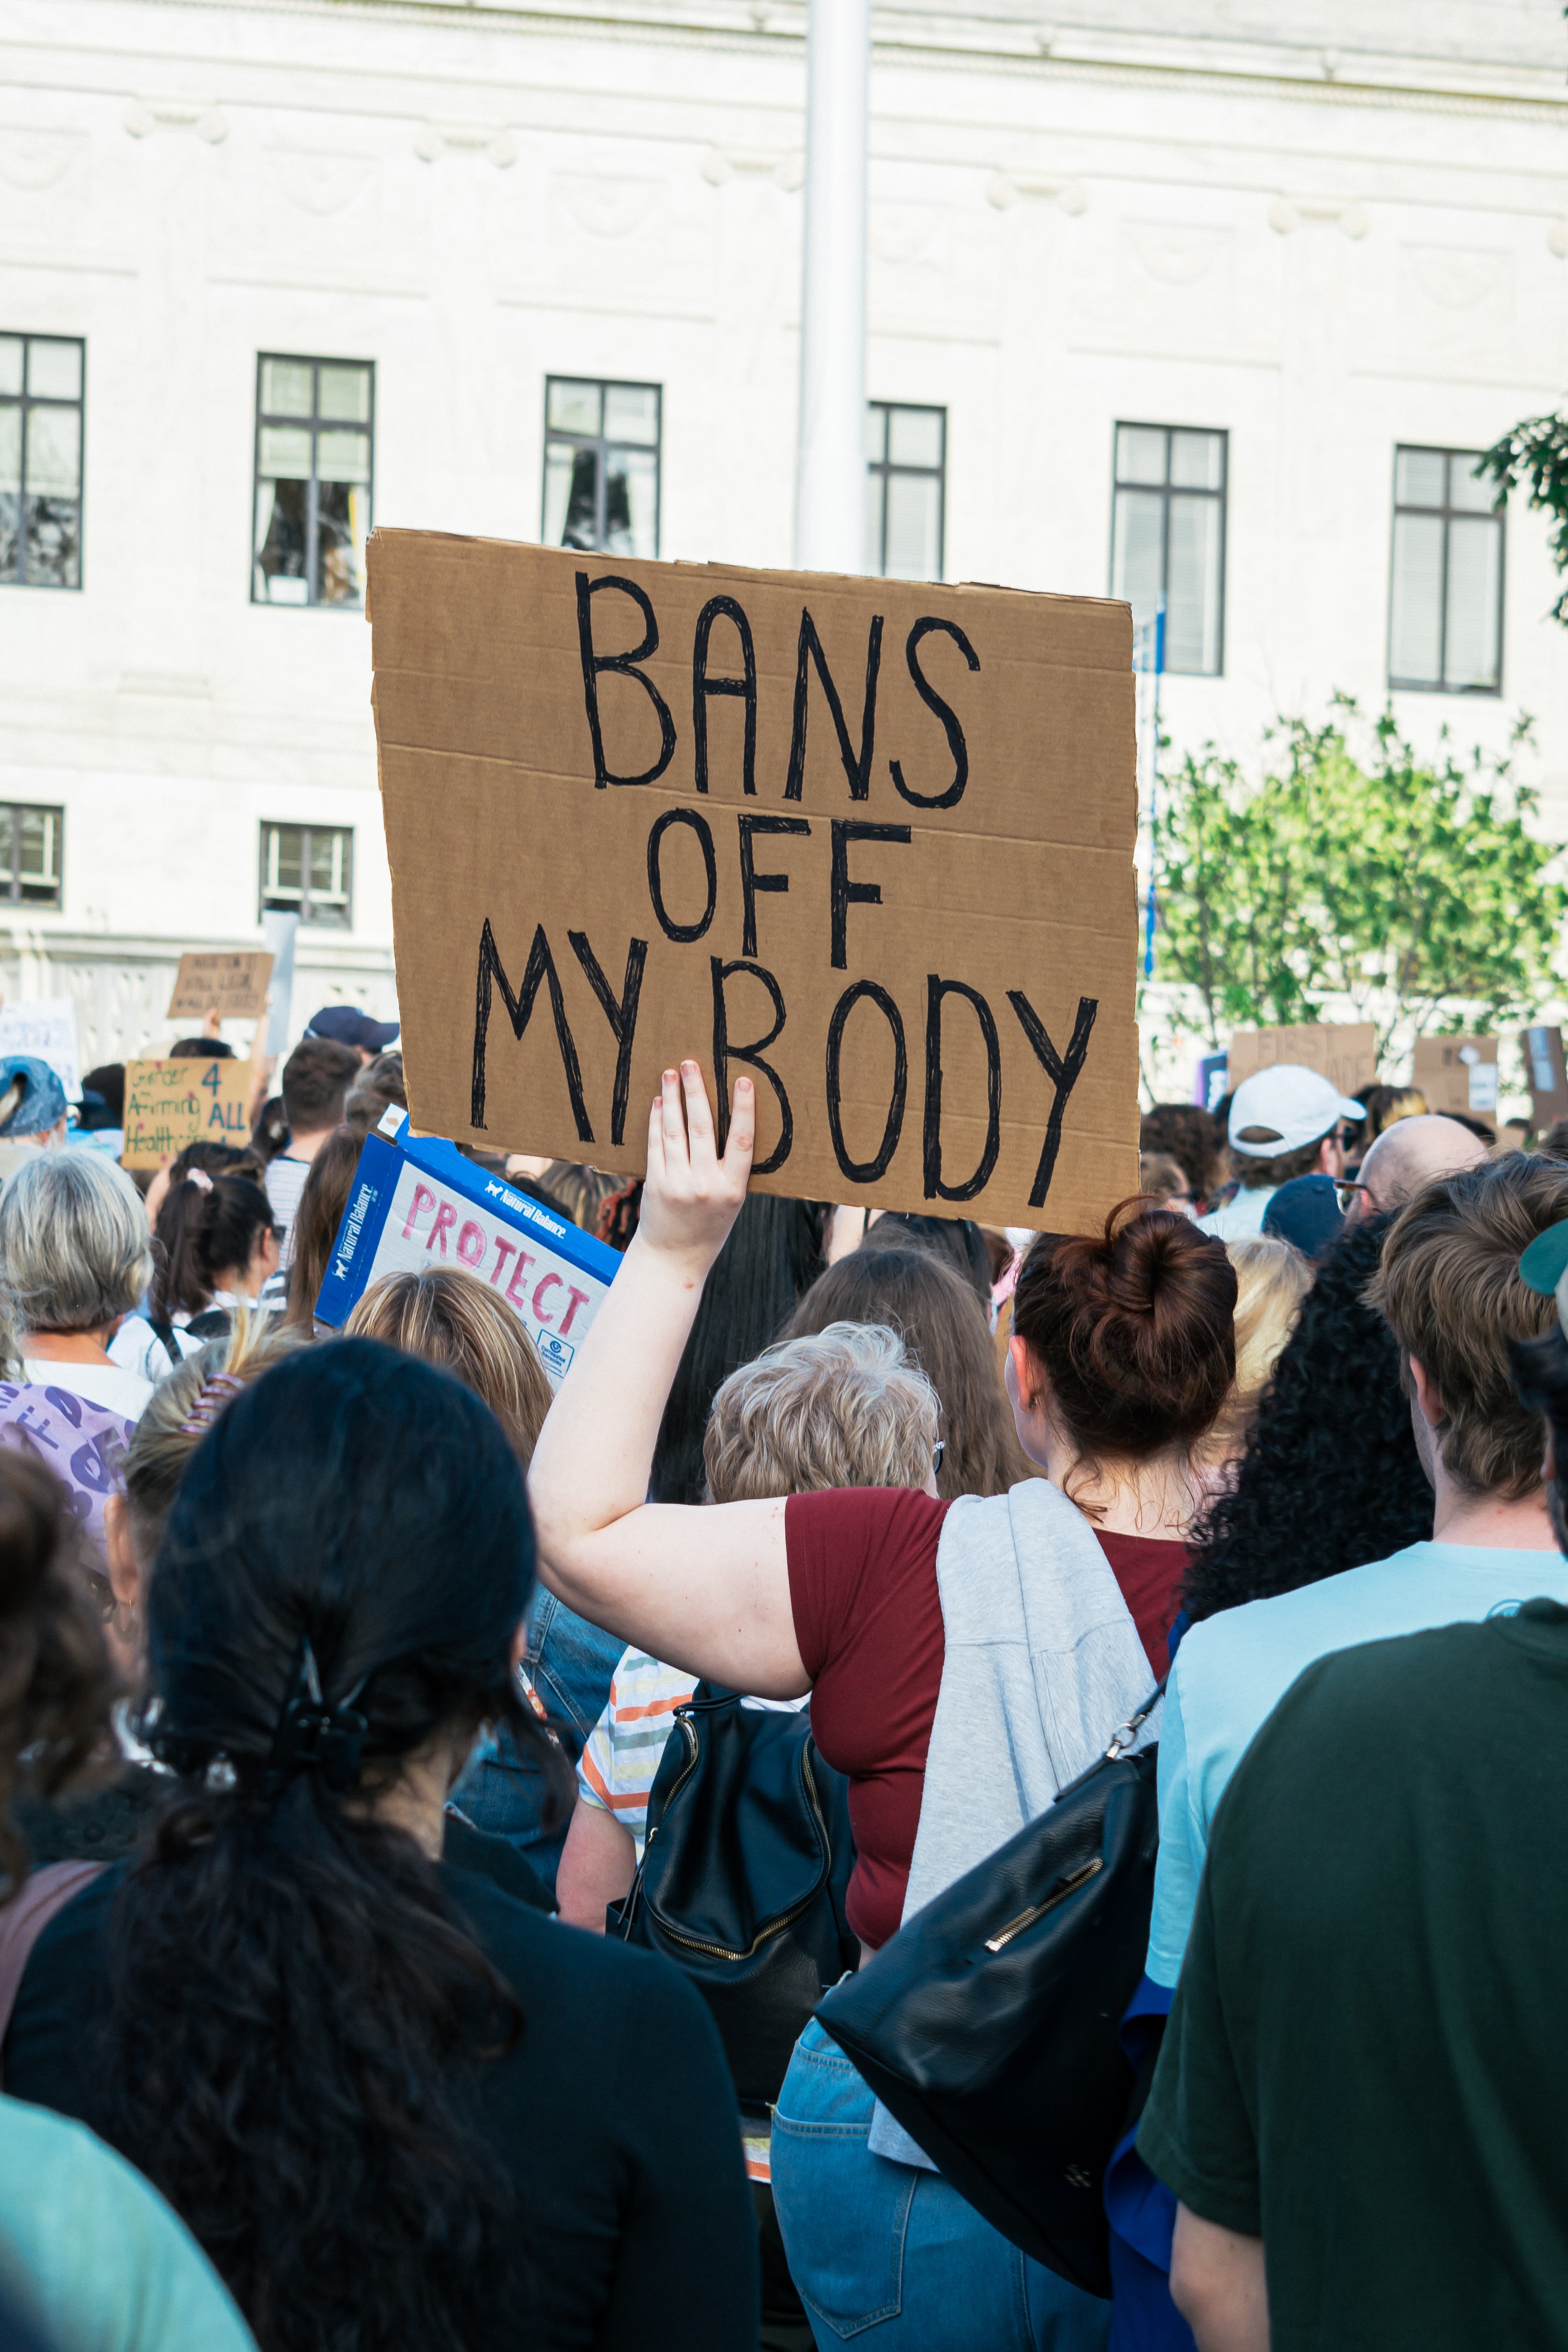 Bans off my body protest sign